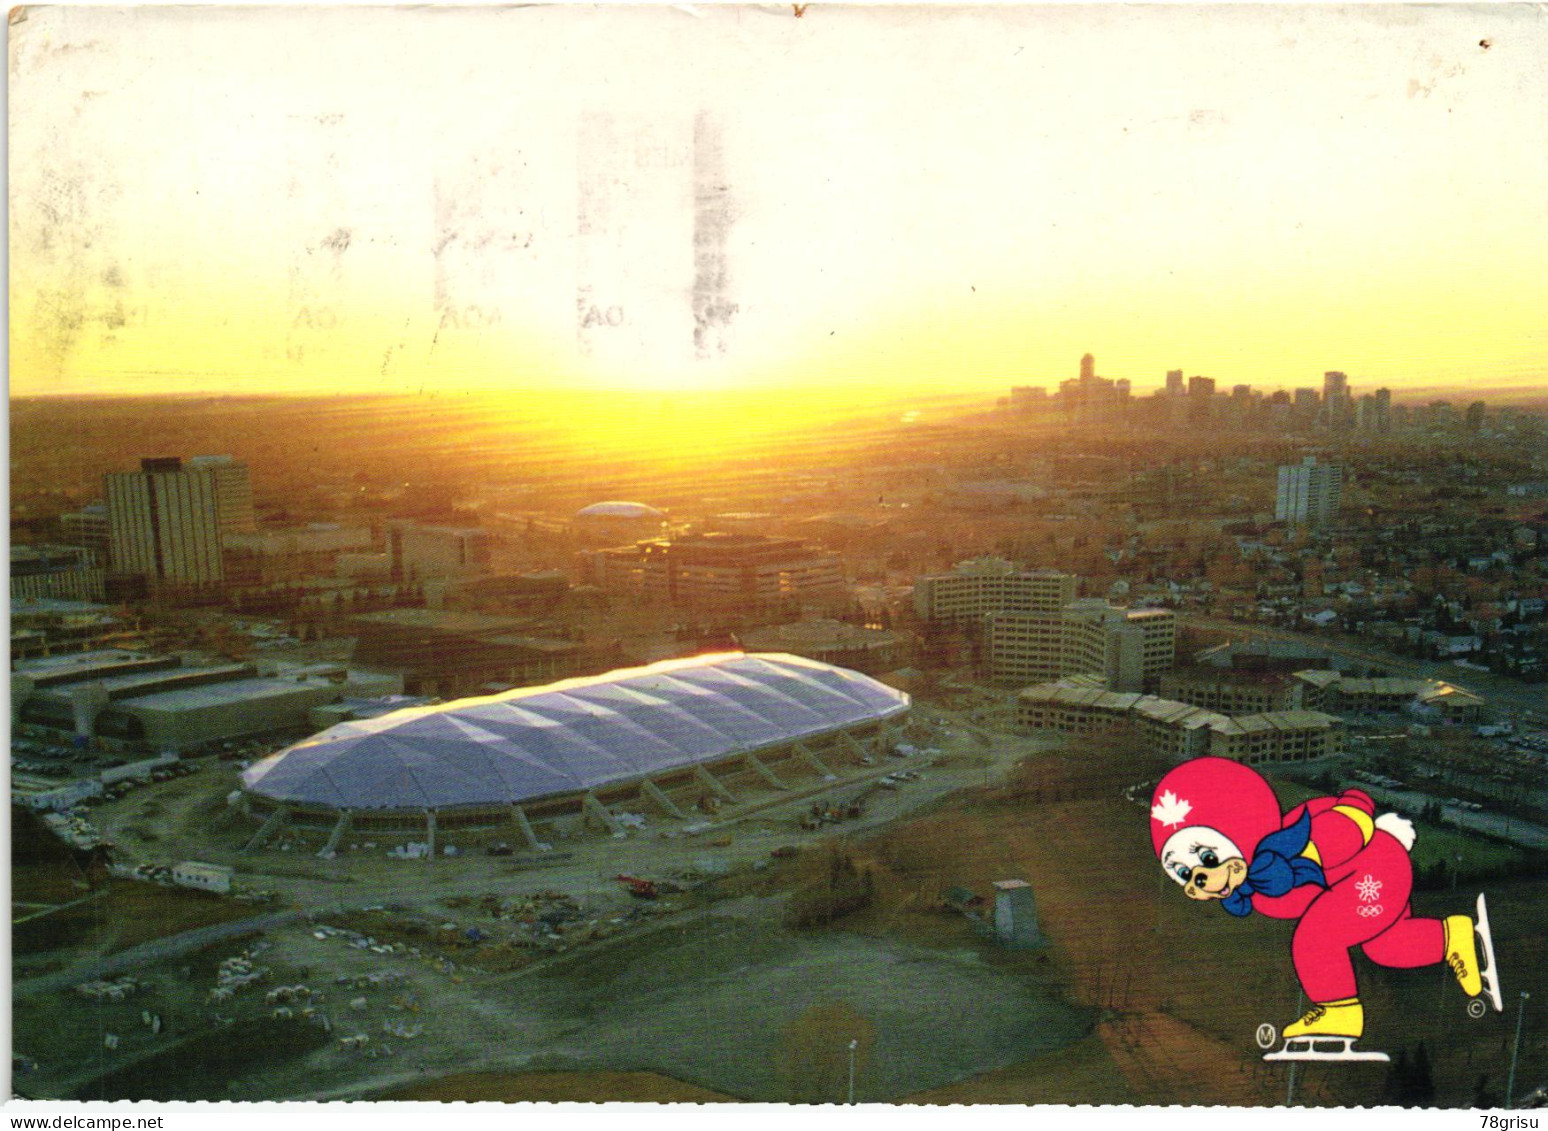 Canada 1988, Calgary Olympic Winter Games, Karte Rodeln Luge Olympic Oval MSST,  Olympische Spiele - Invierno 1988: Calgary